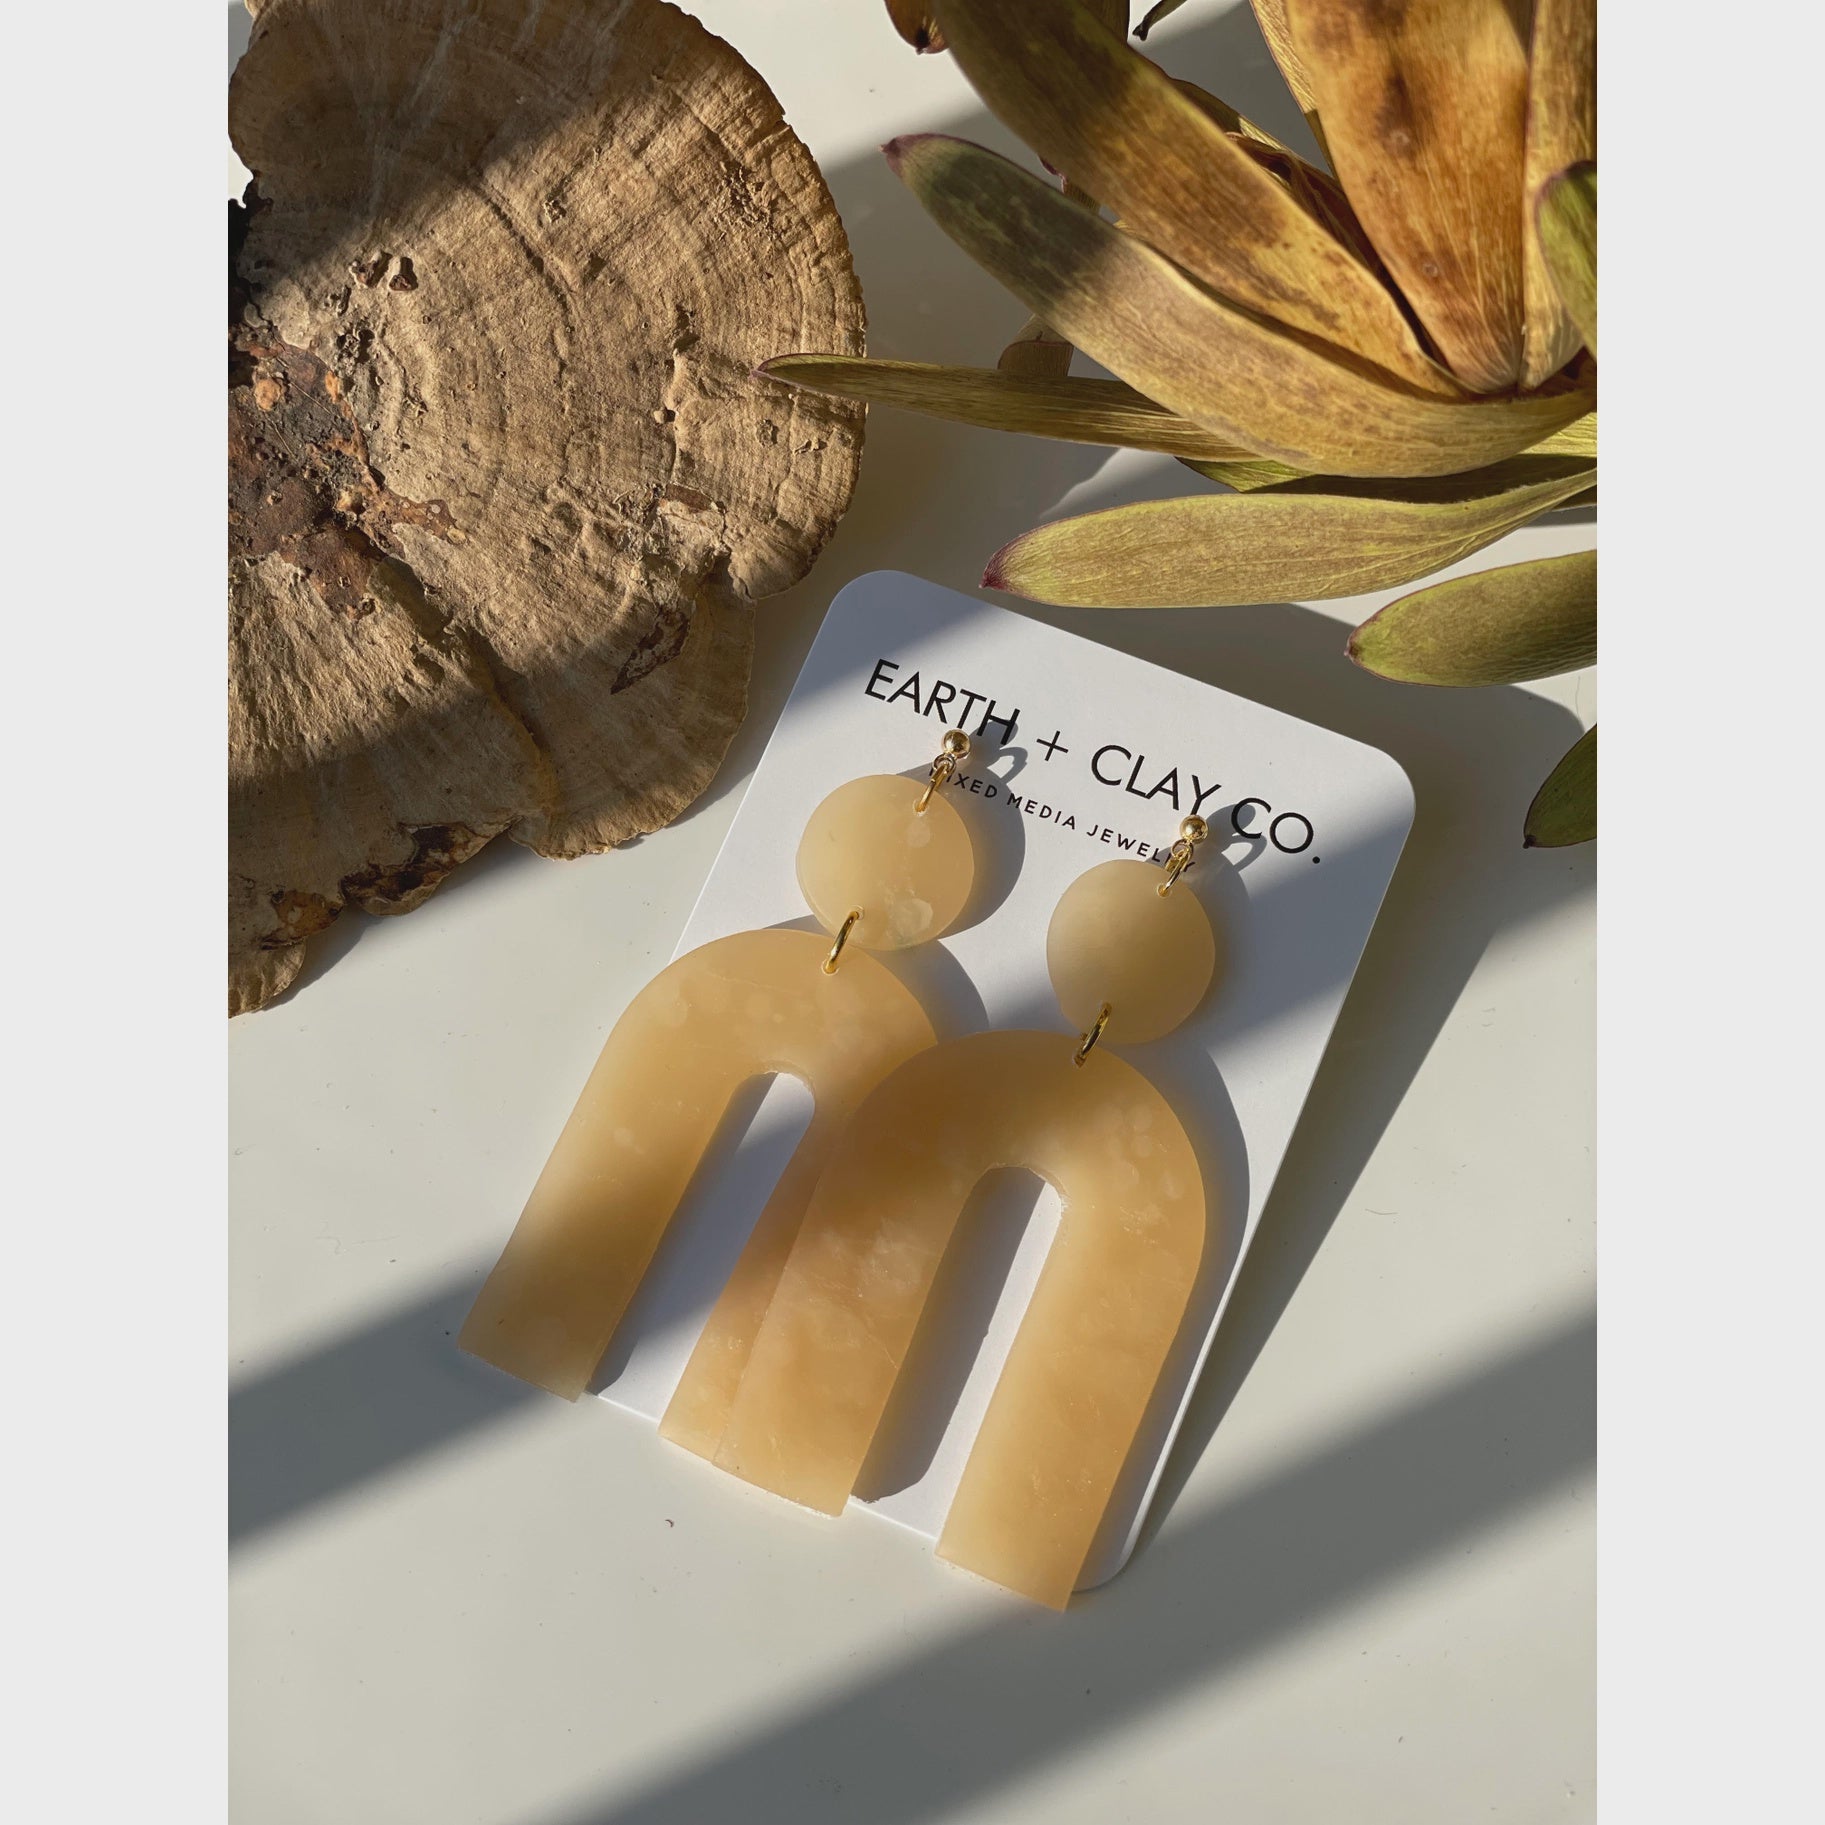 The Translucent  Arch Earrings by Earth + Clay Collective